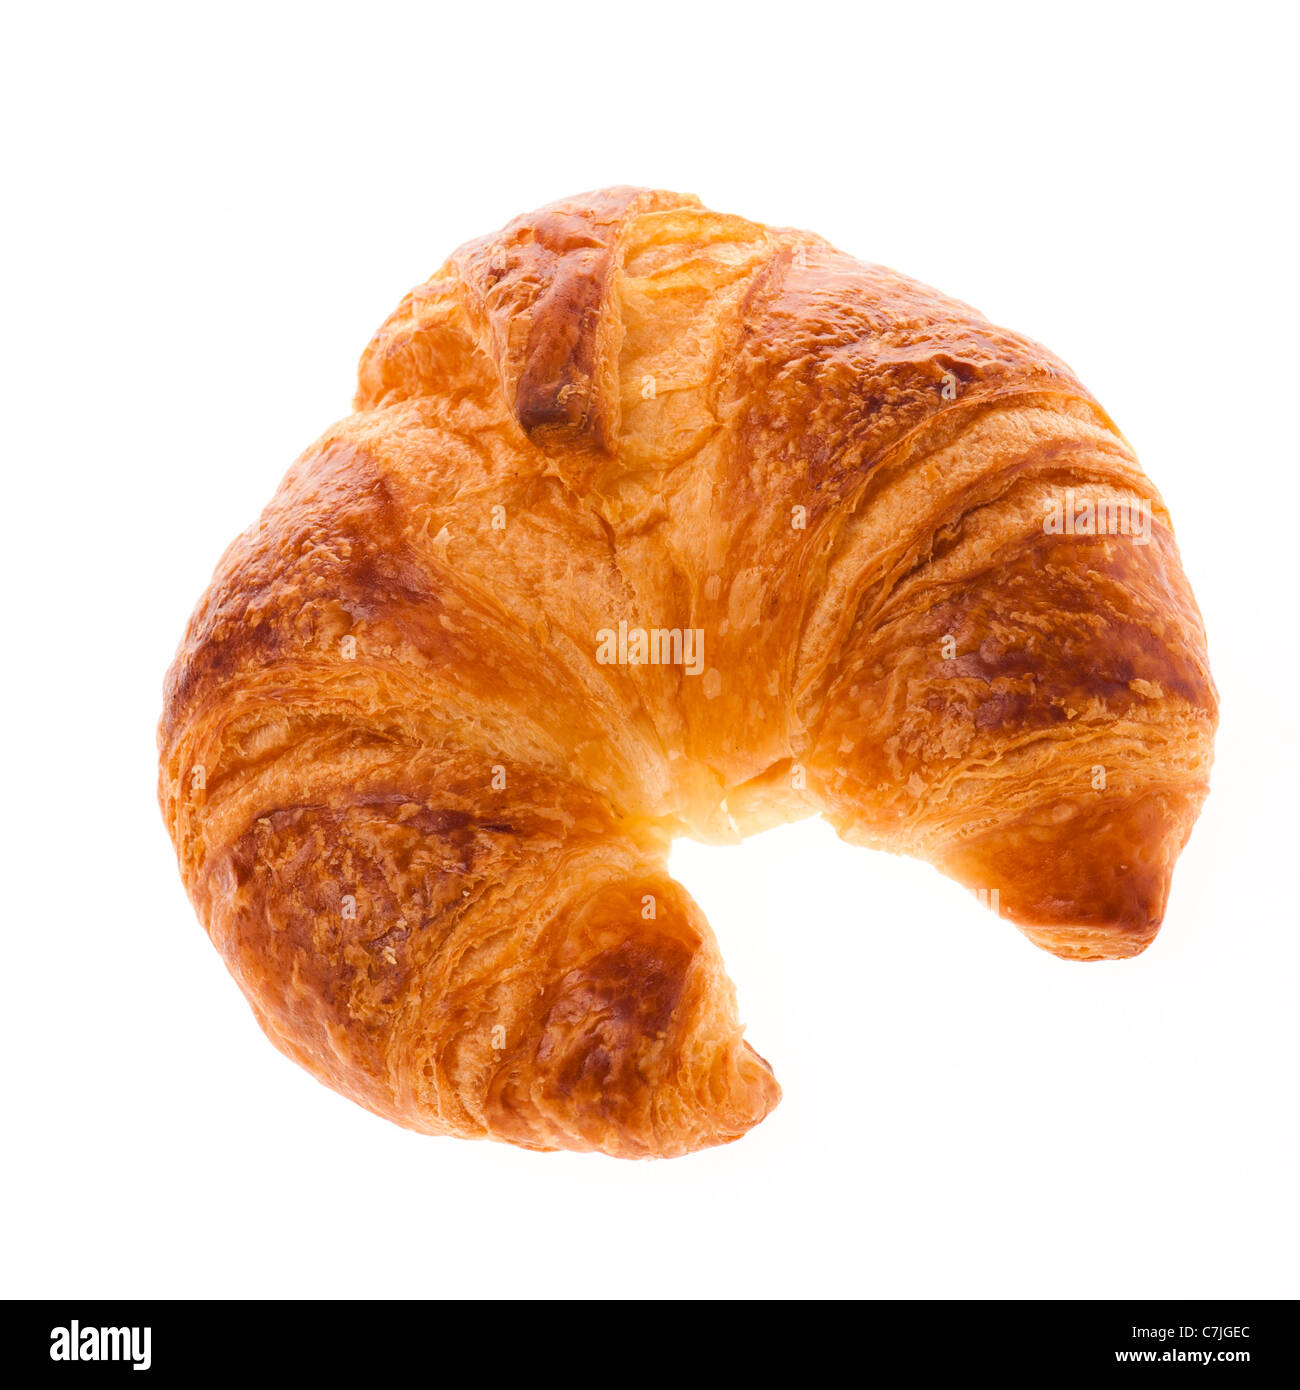 A fresh baked croissant on a white backlit background cutout silo Stock Photo